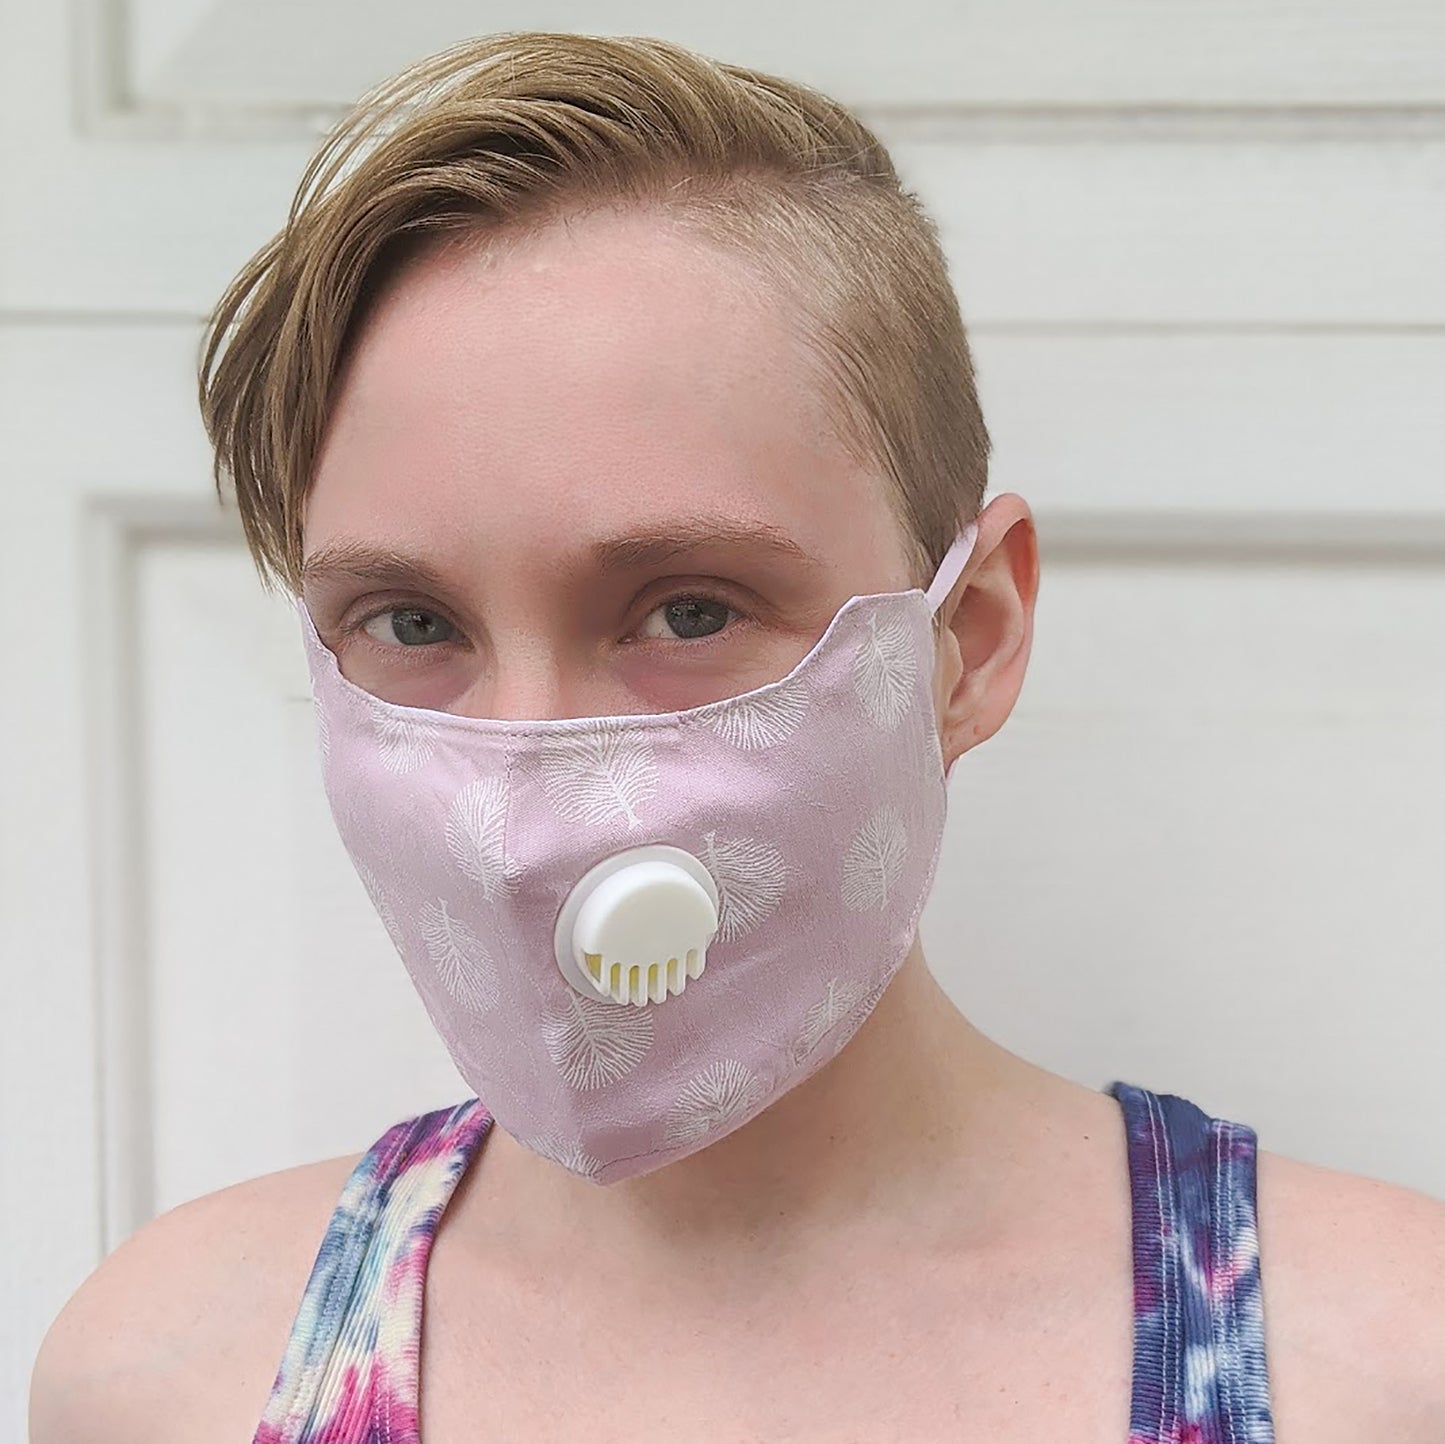 Lightweight 3 layer 100% Cotton Reusable Face Mask w/ breathing valve + 2 carbon filters, adjustable ear straps, nose wire clip